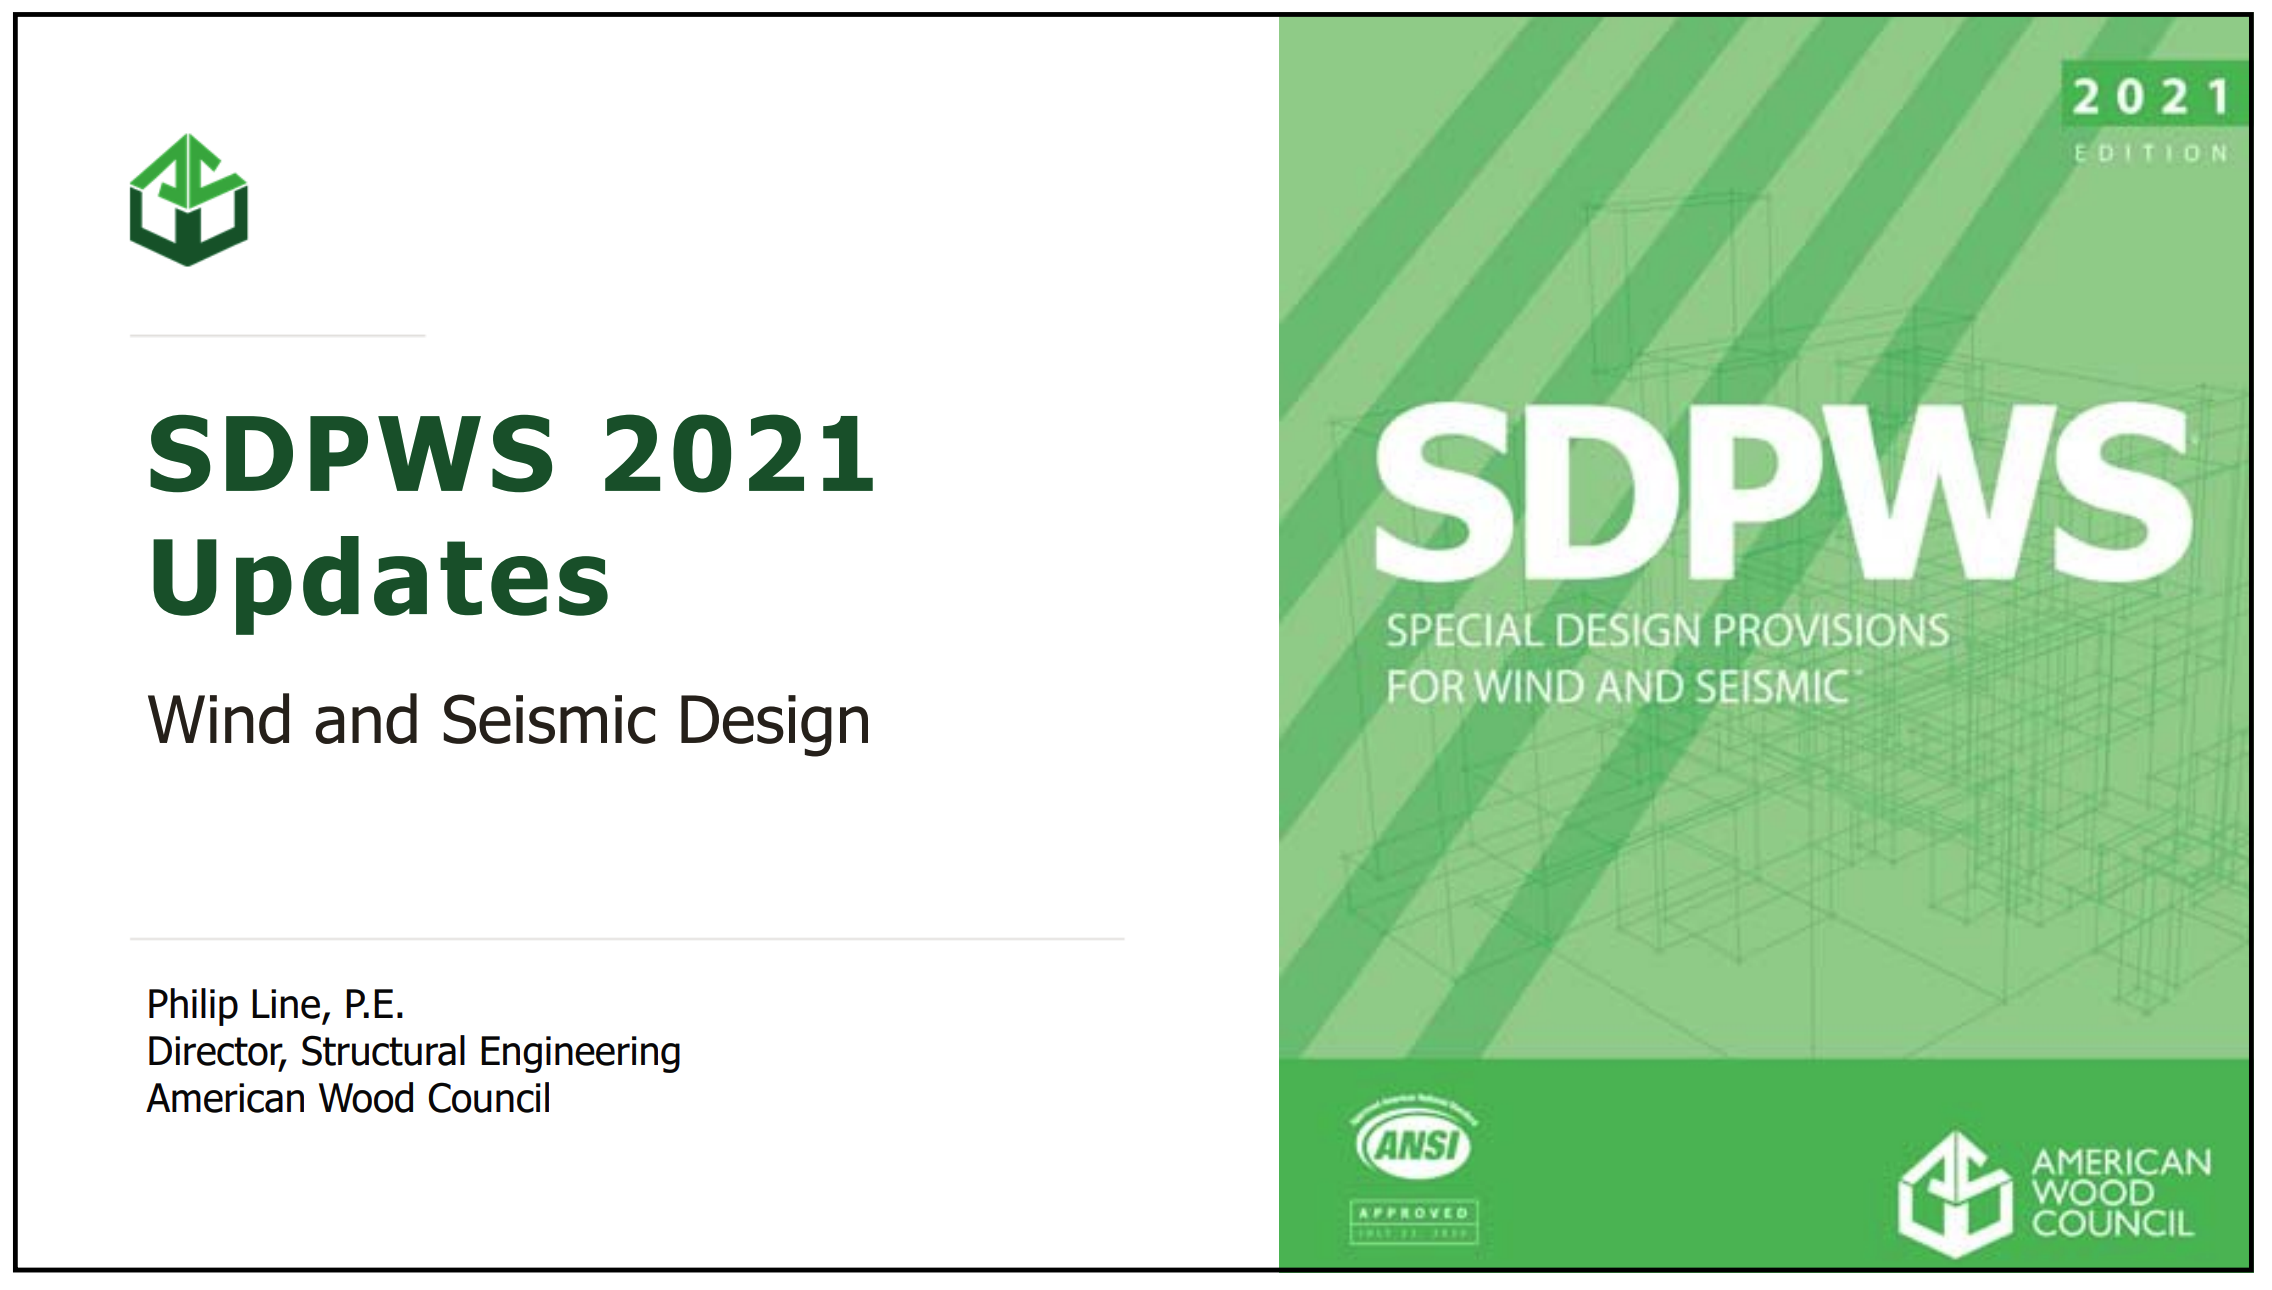 Standard Update: 2021 Special Design Provisions for Wind & Seismic - STD421